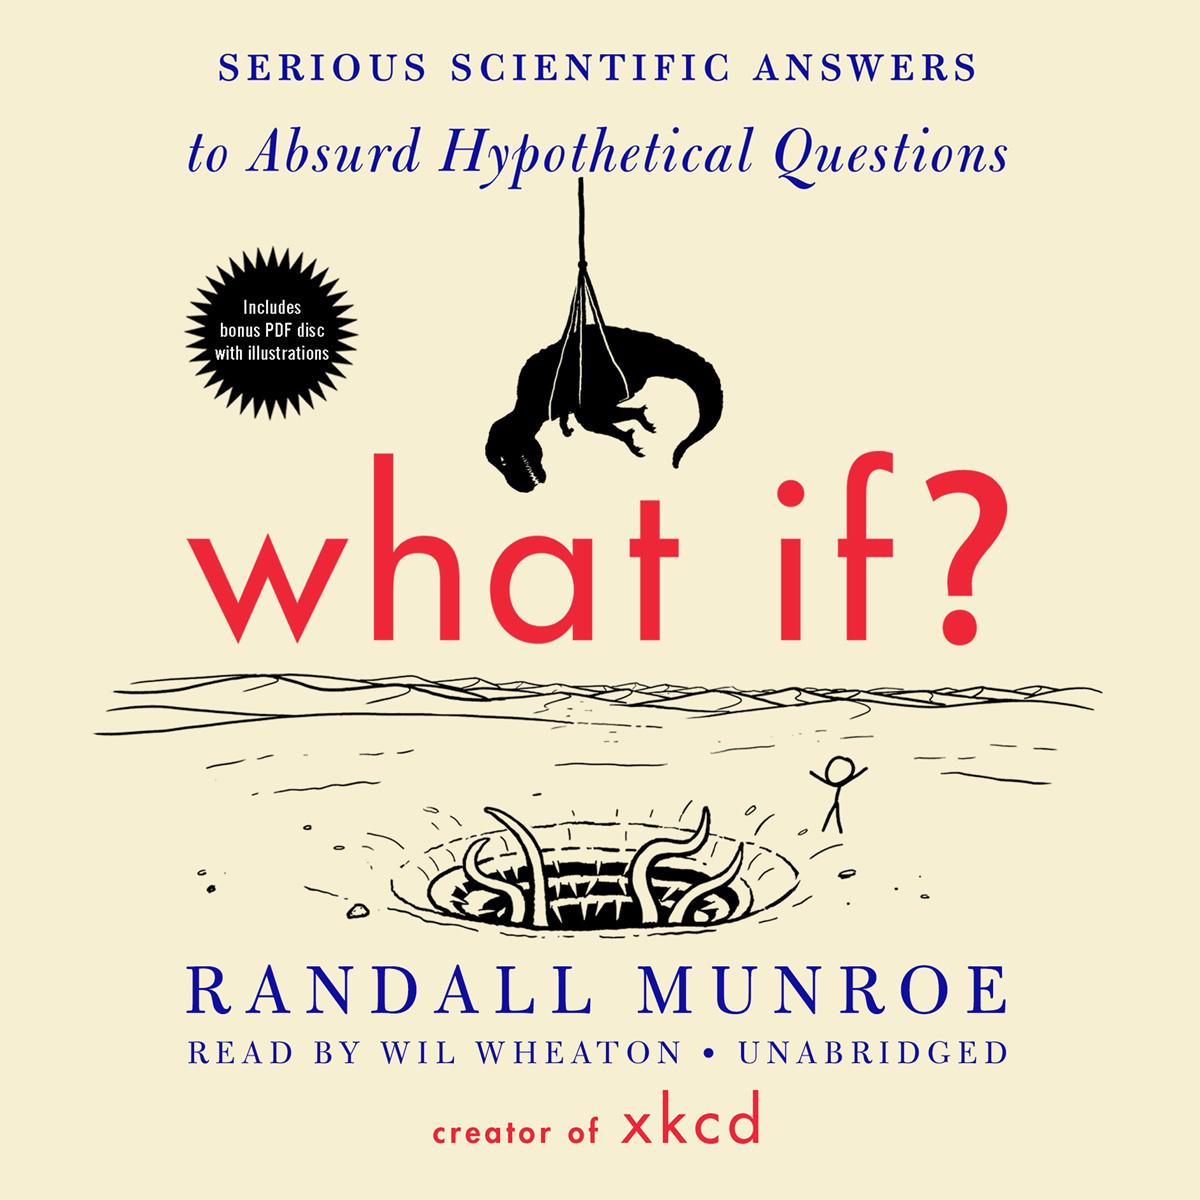 What If Serious Scientific Answers to Absurd Hypothetical Questions for $2.99